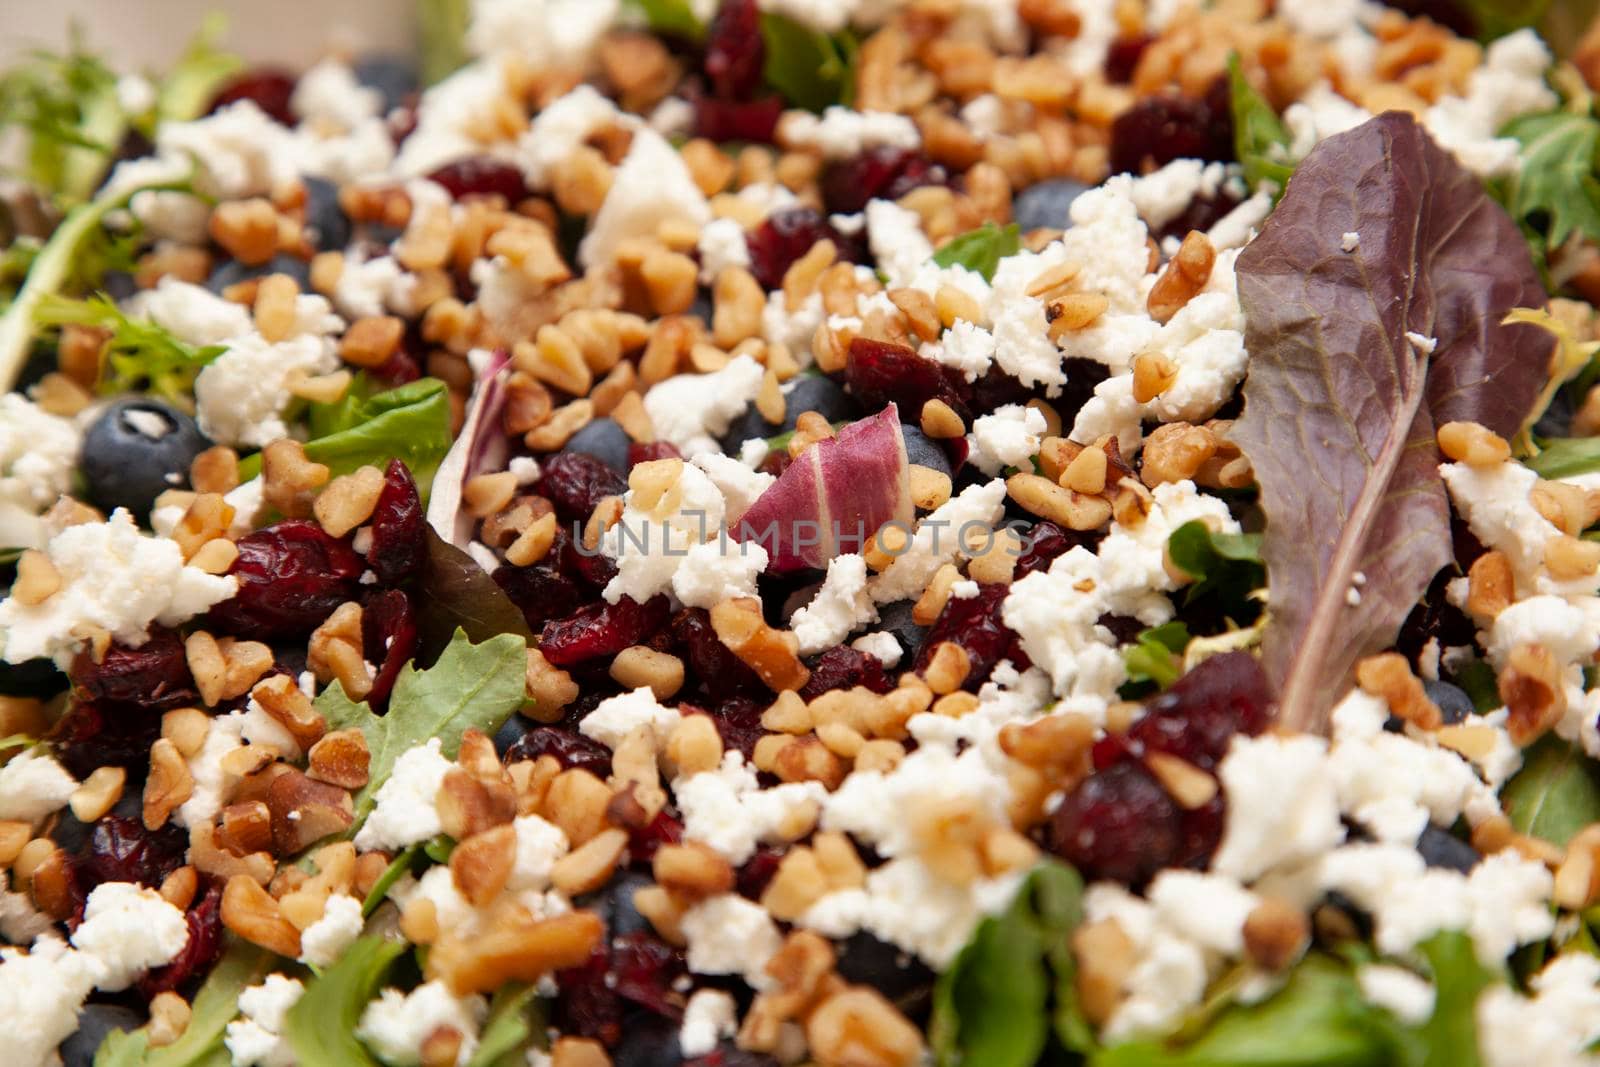 beautiful full looking salad containing feta, blueberries, walnuts and spinach